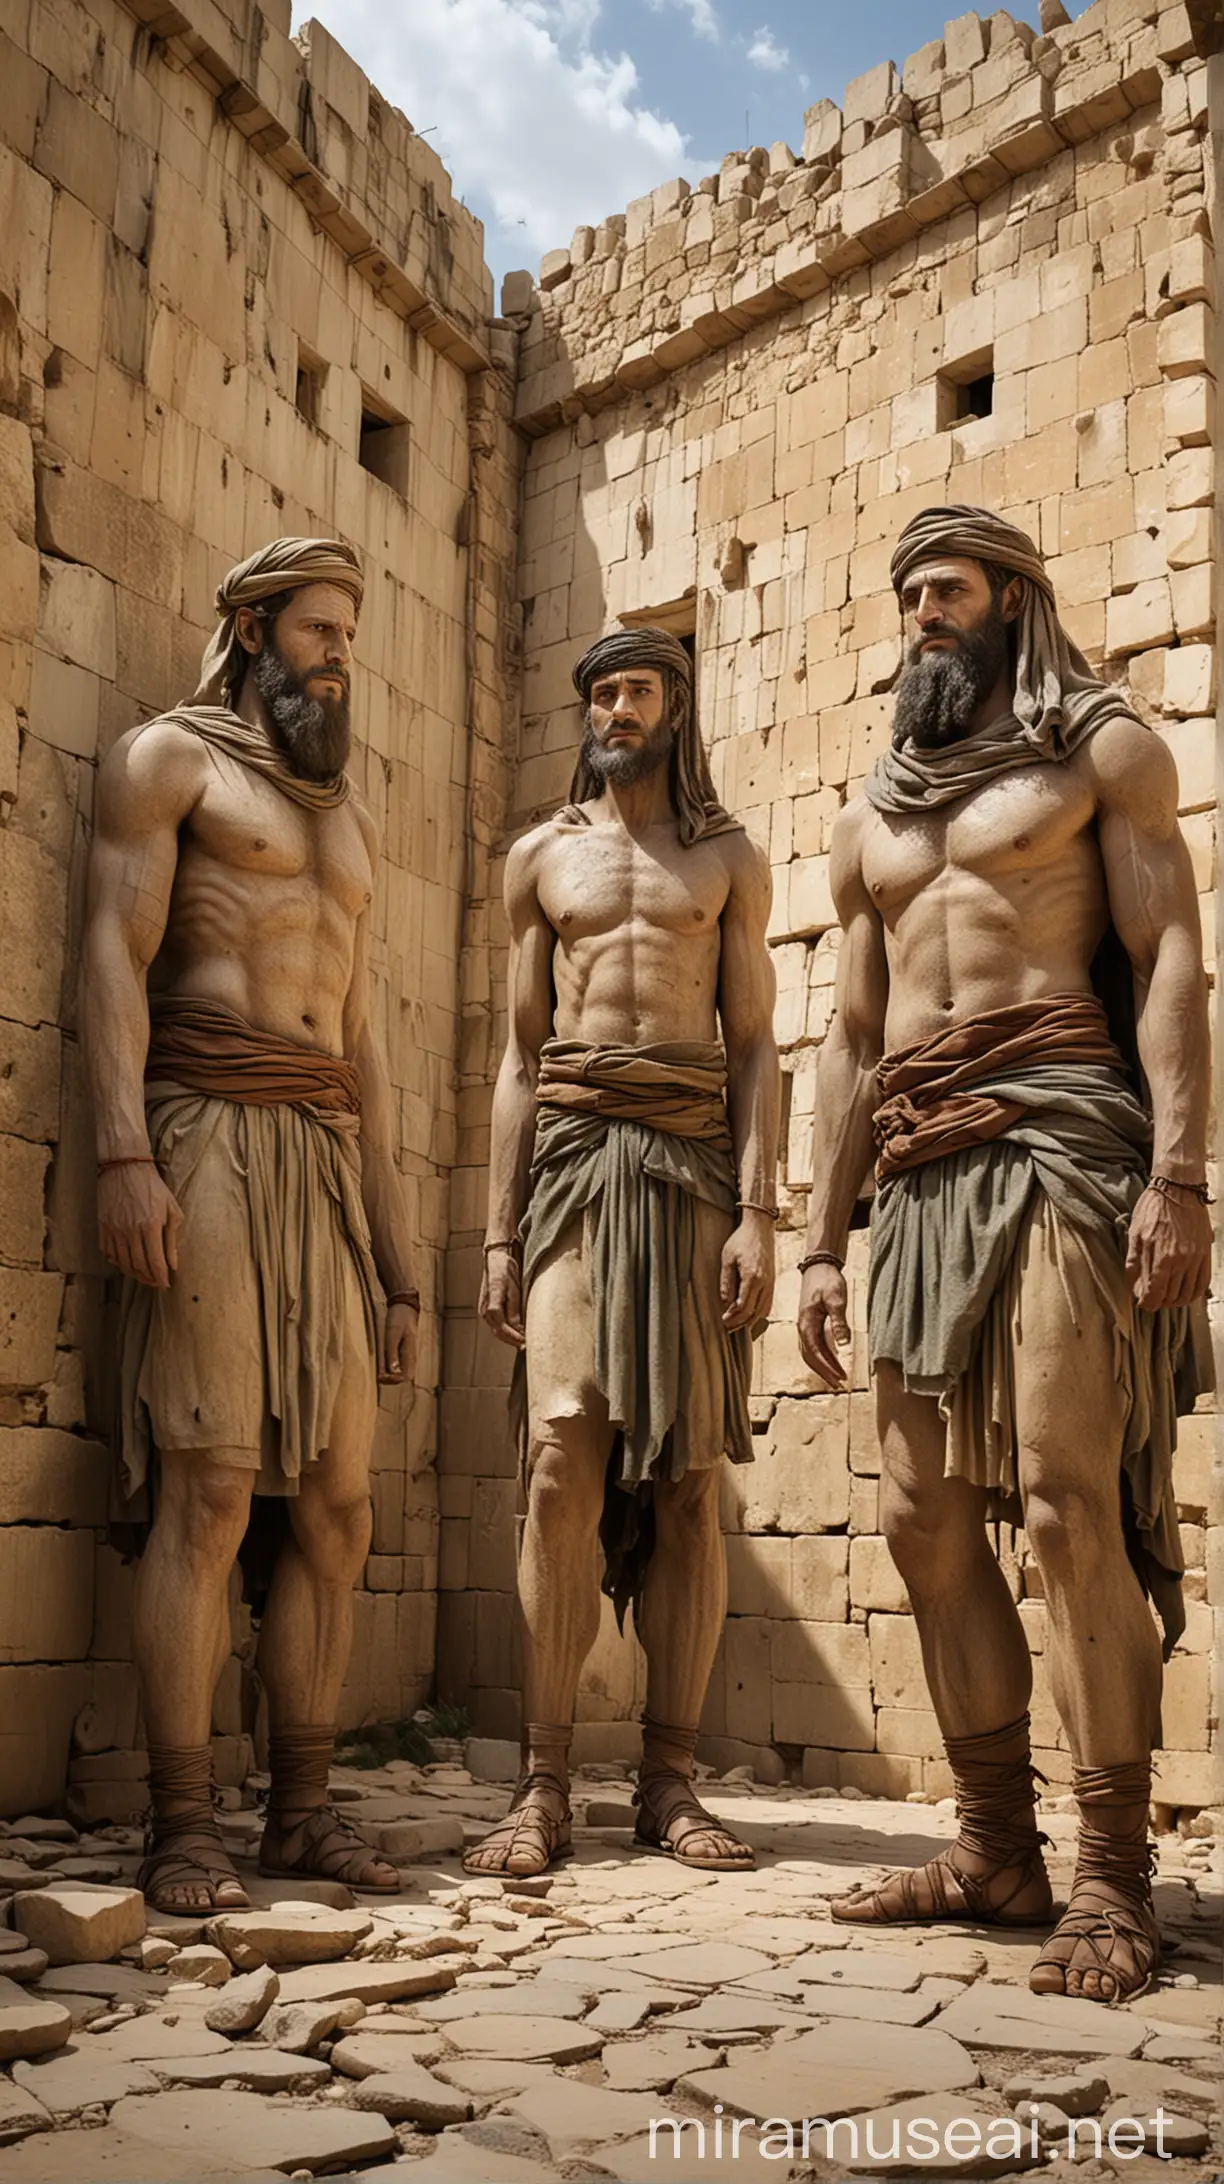 Create an image of three male towering giants, Talmai, Sheshai, and Ahiman, standing in an ancient city setting, perhaps Hebron. They should have a commanding presence with exaggerated height to emphasize their gigantic stature."